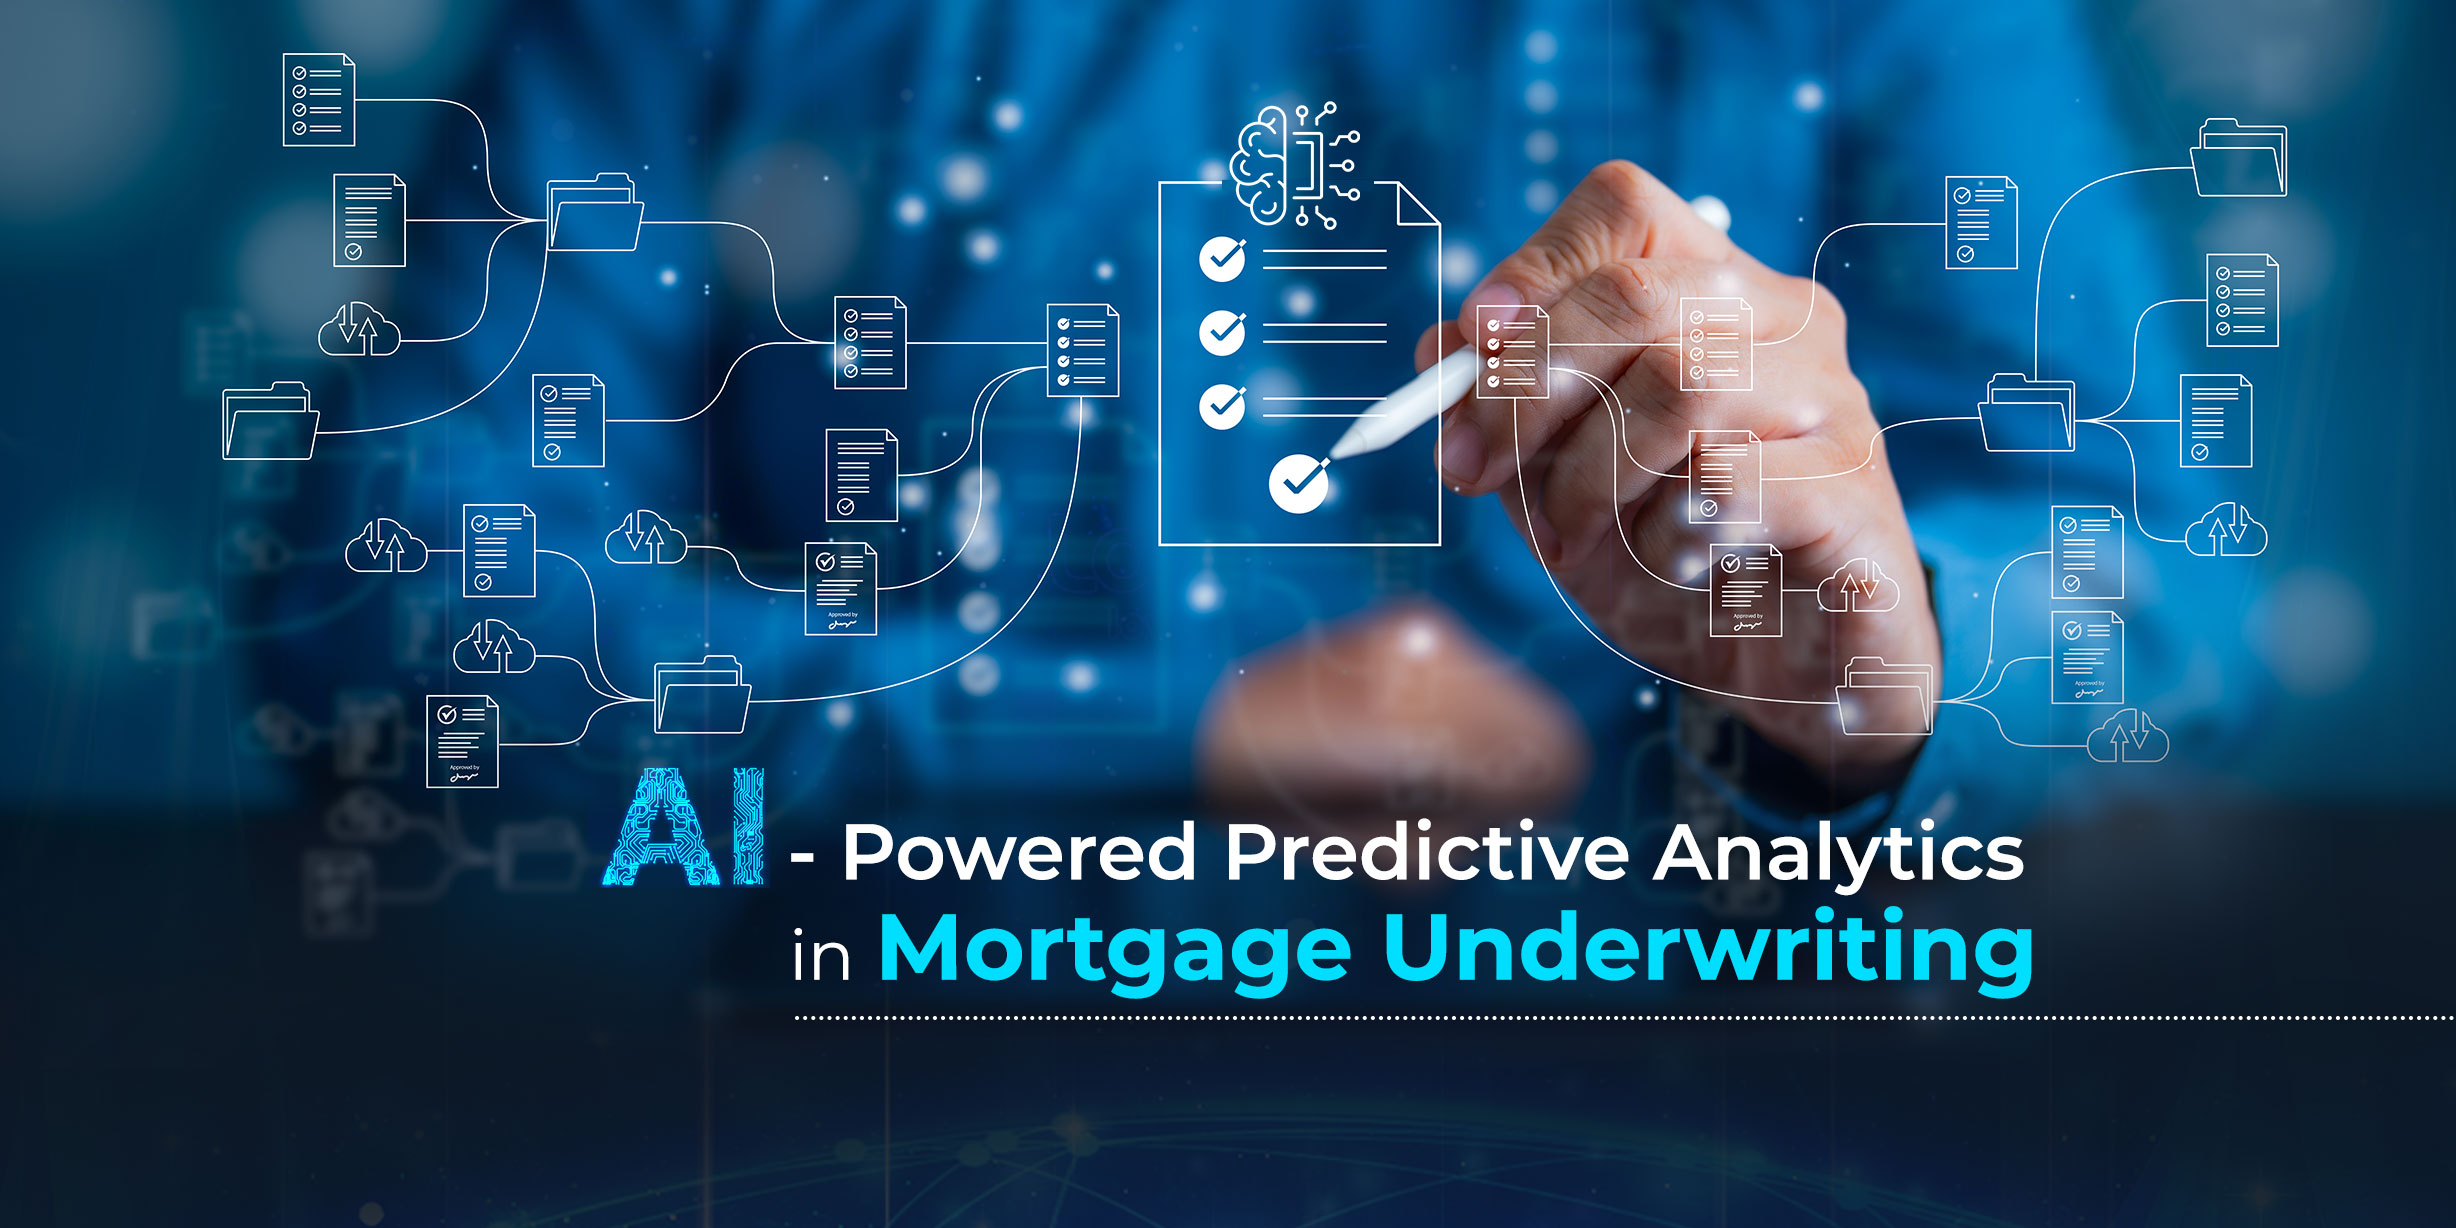 AI-Powered Predictive Analytics in Mortgage Underwriting